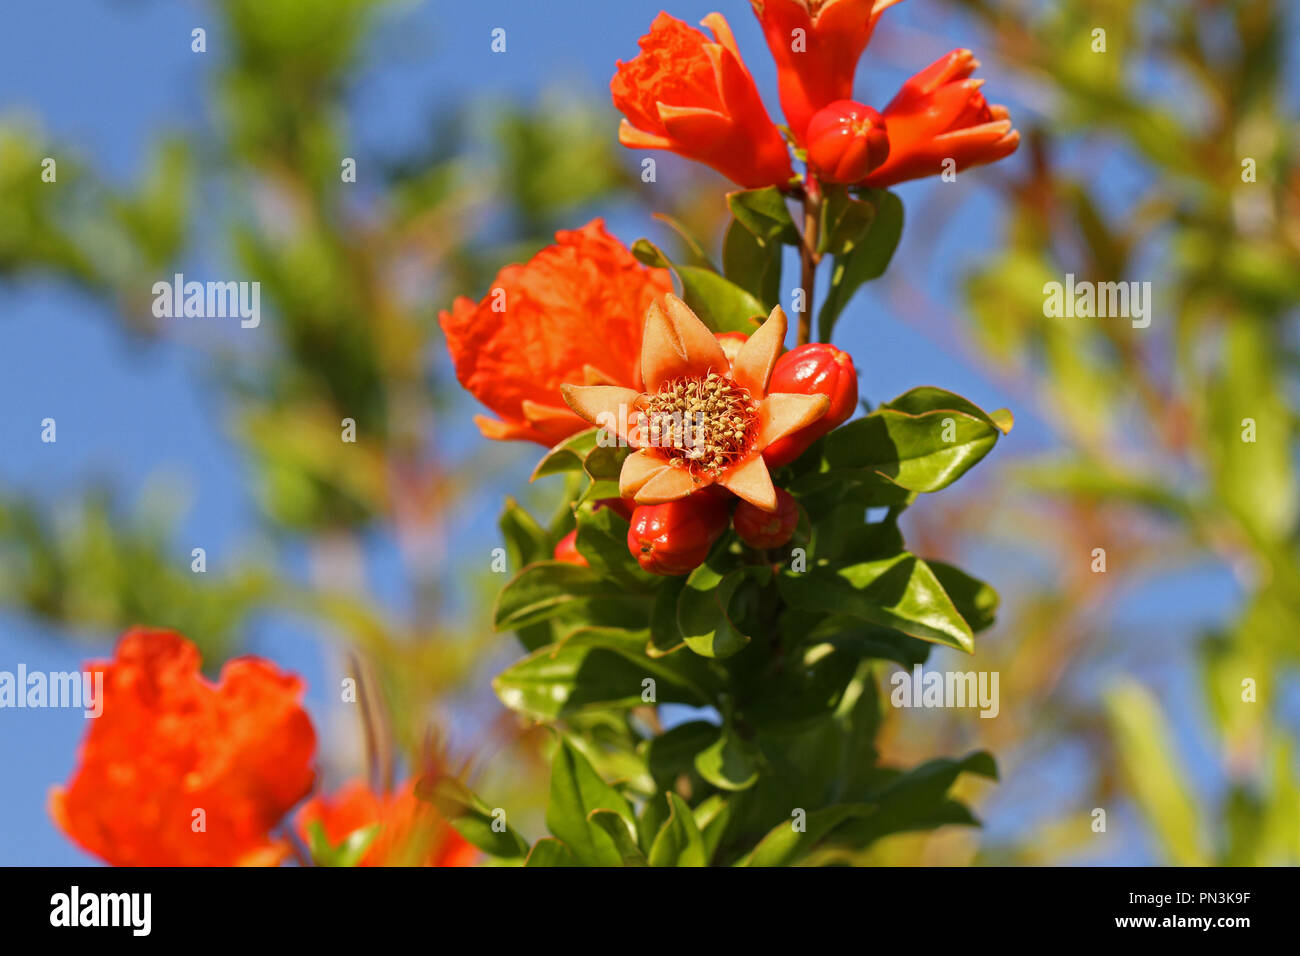 red pomegranate or punica flower or blossom starting to set fruit with open flowers nearby and a bud in the foreground melograno in summer in Italy Stock Photo